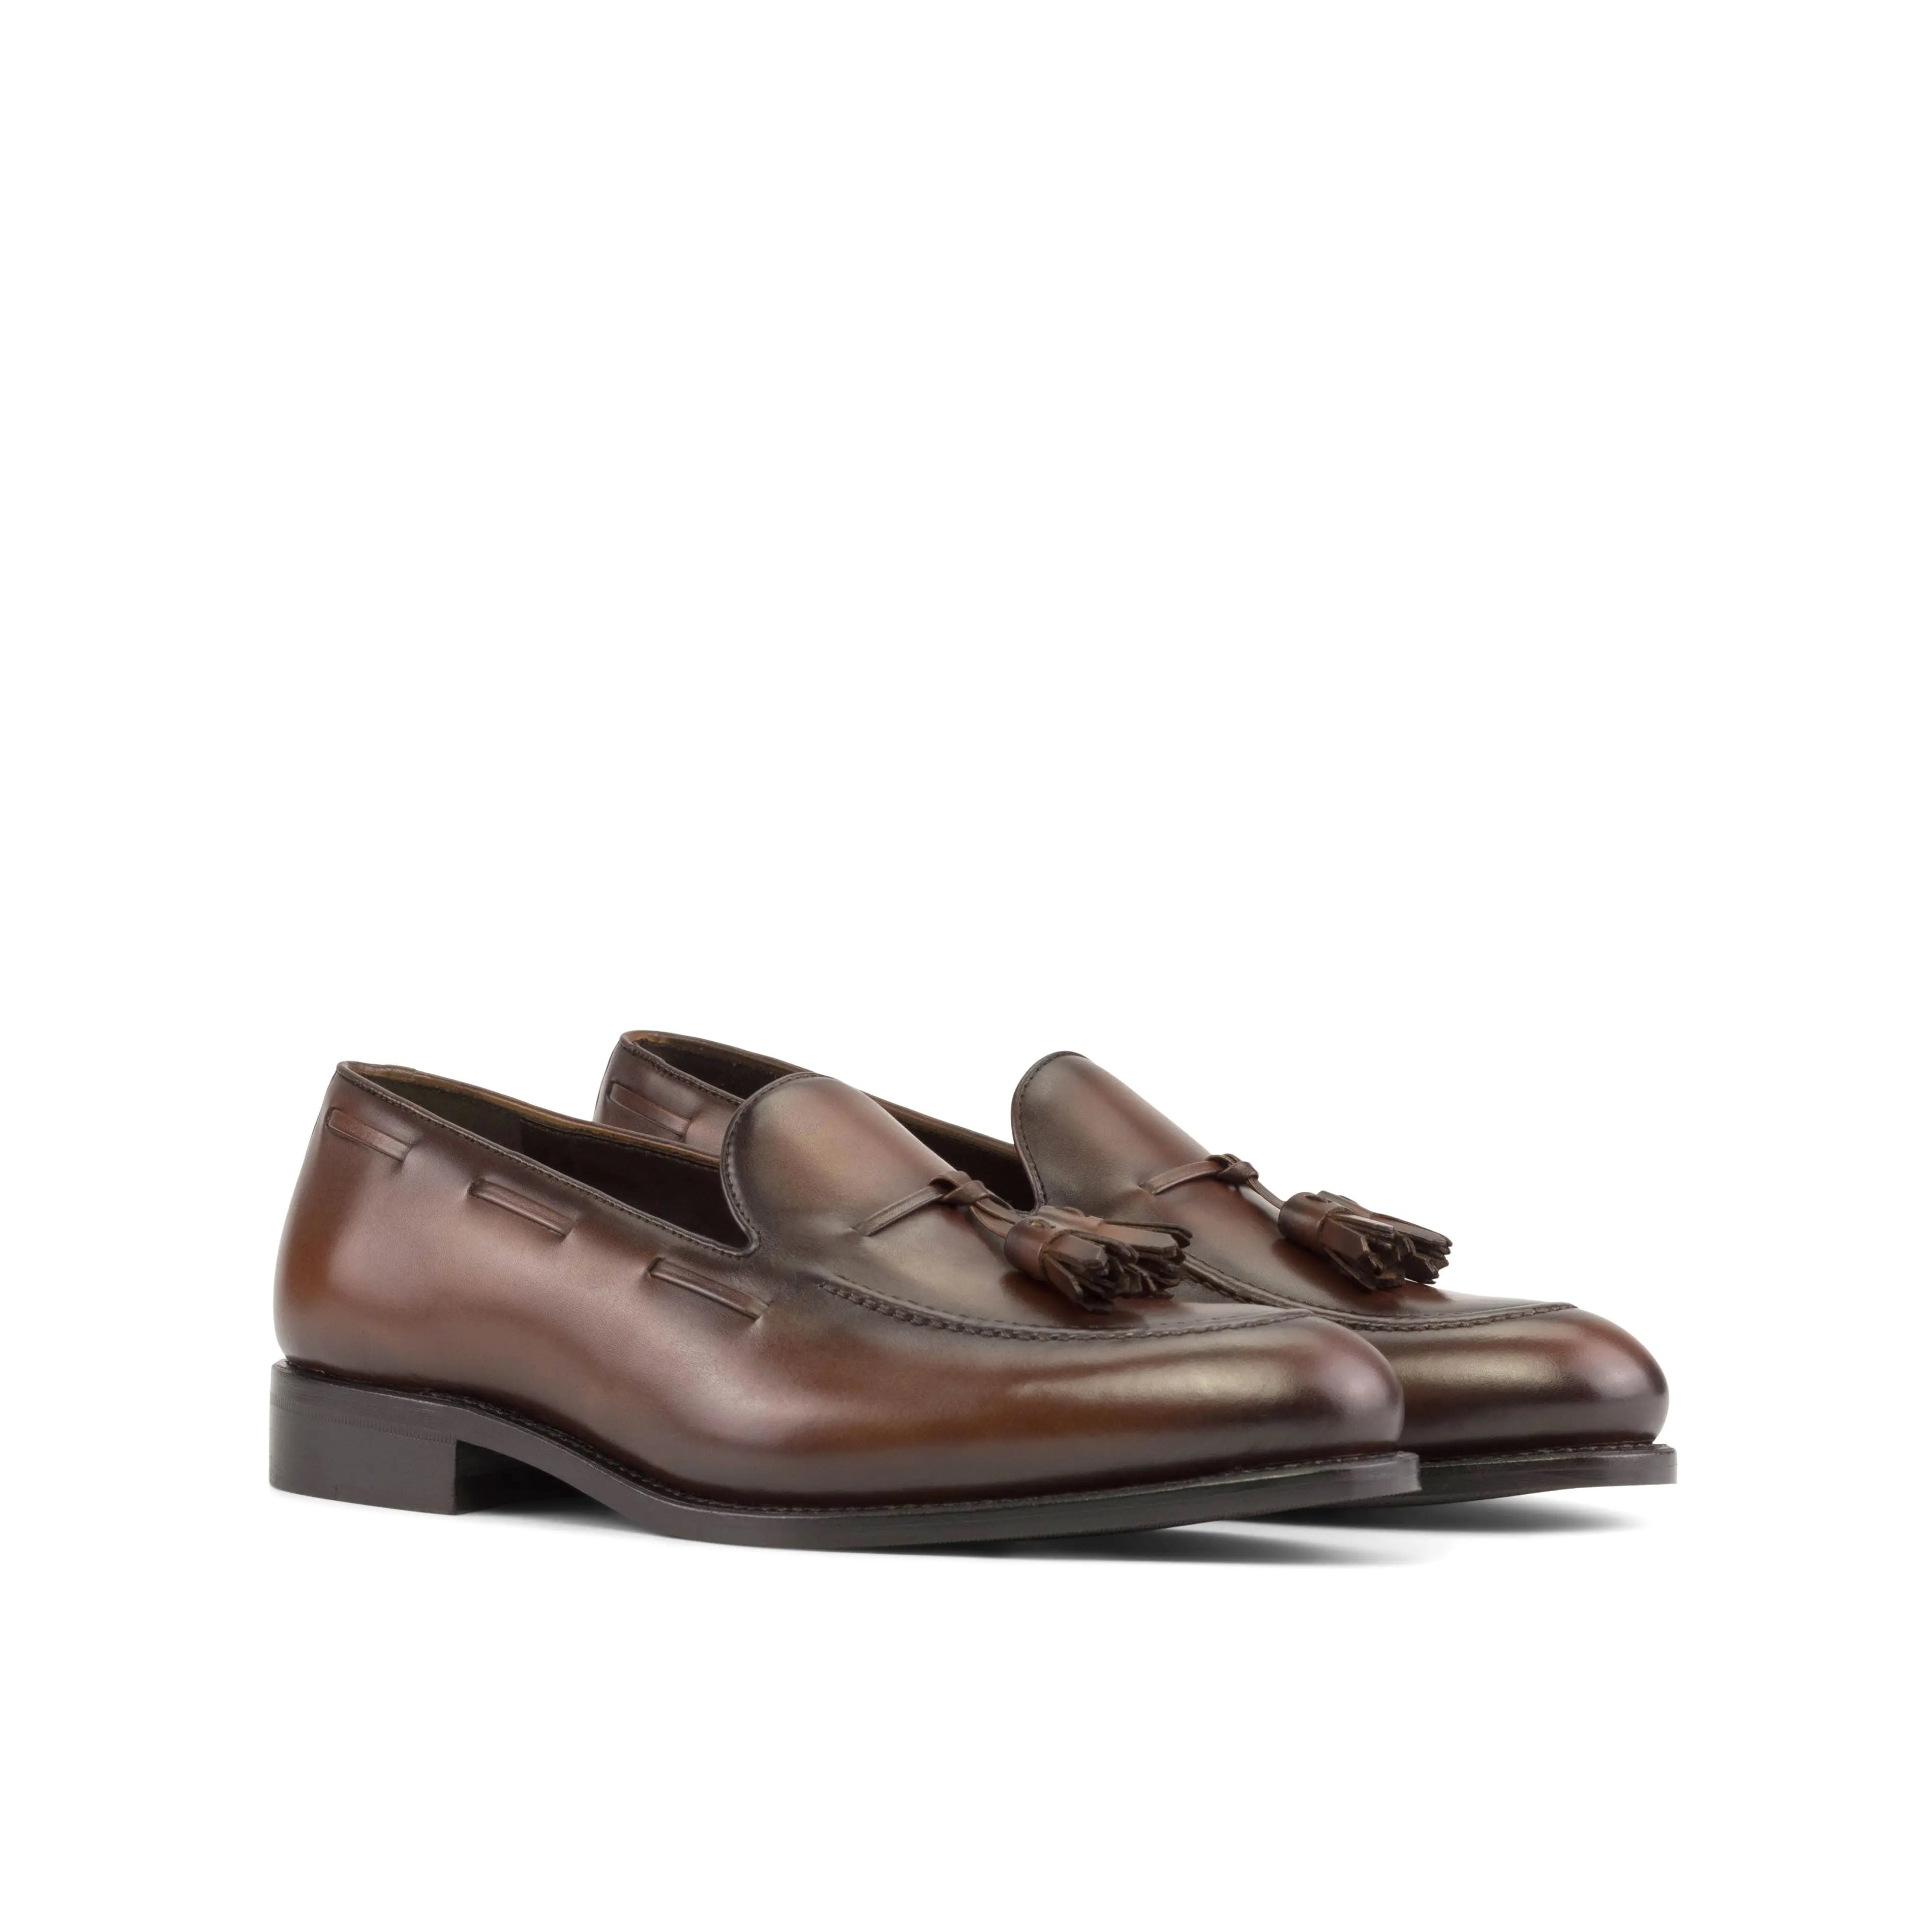 dapperfam luciano in med brown men's italian leather loafer